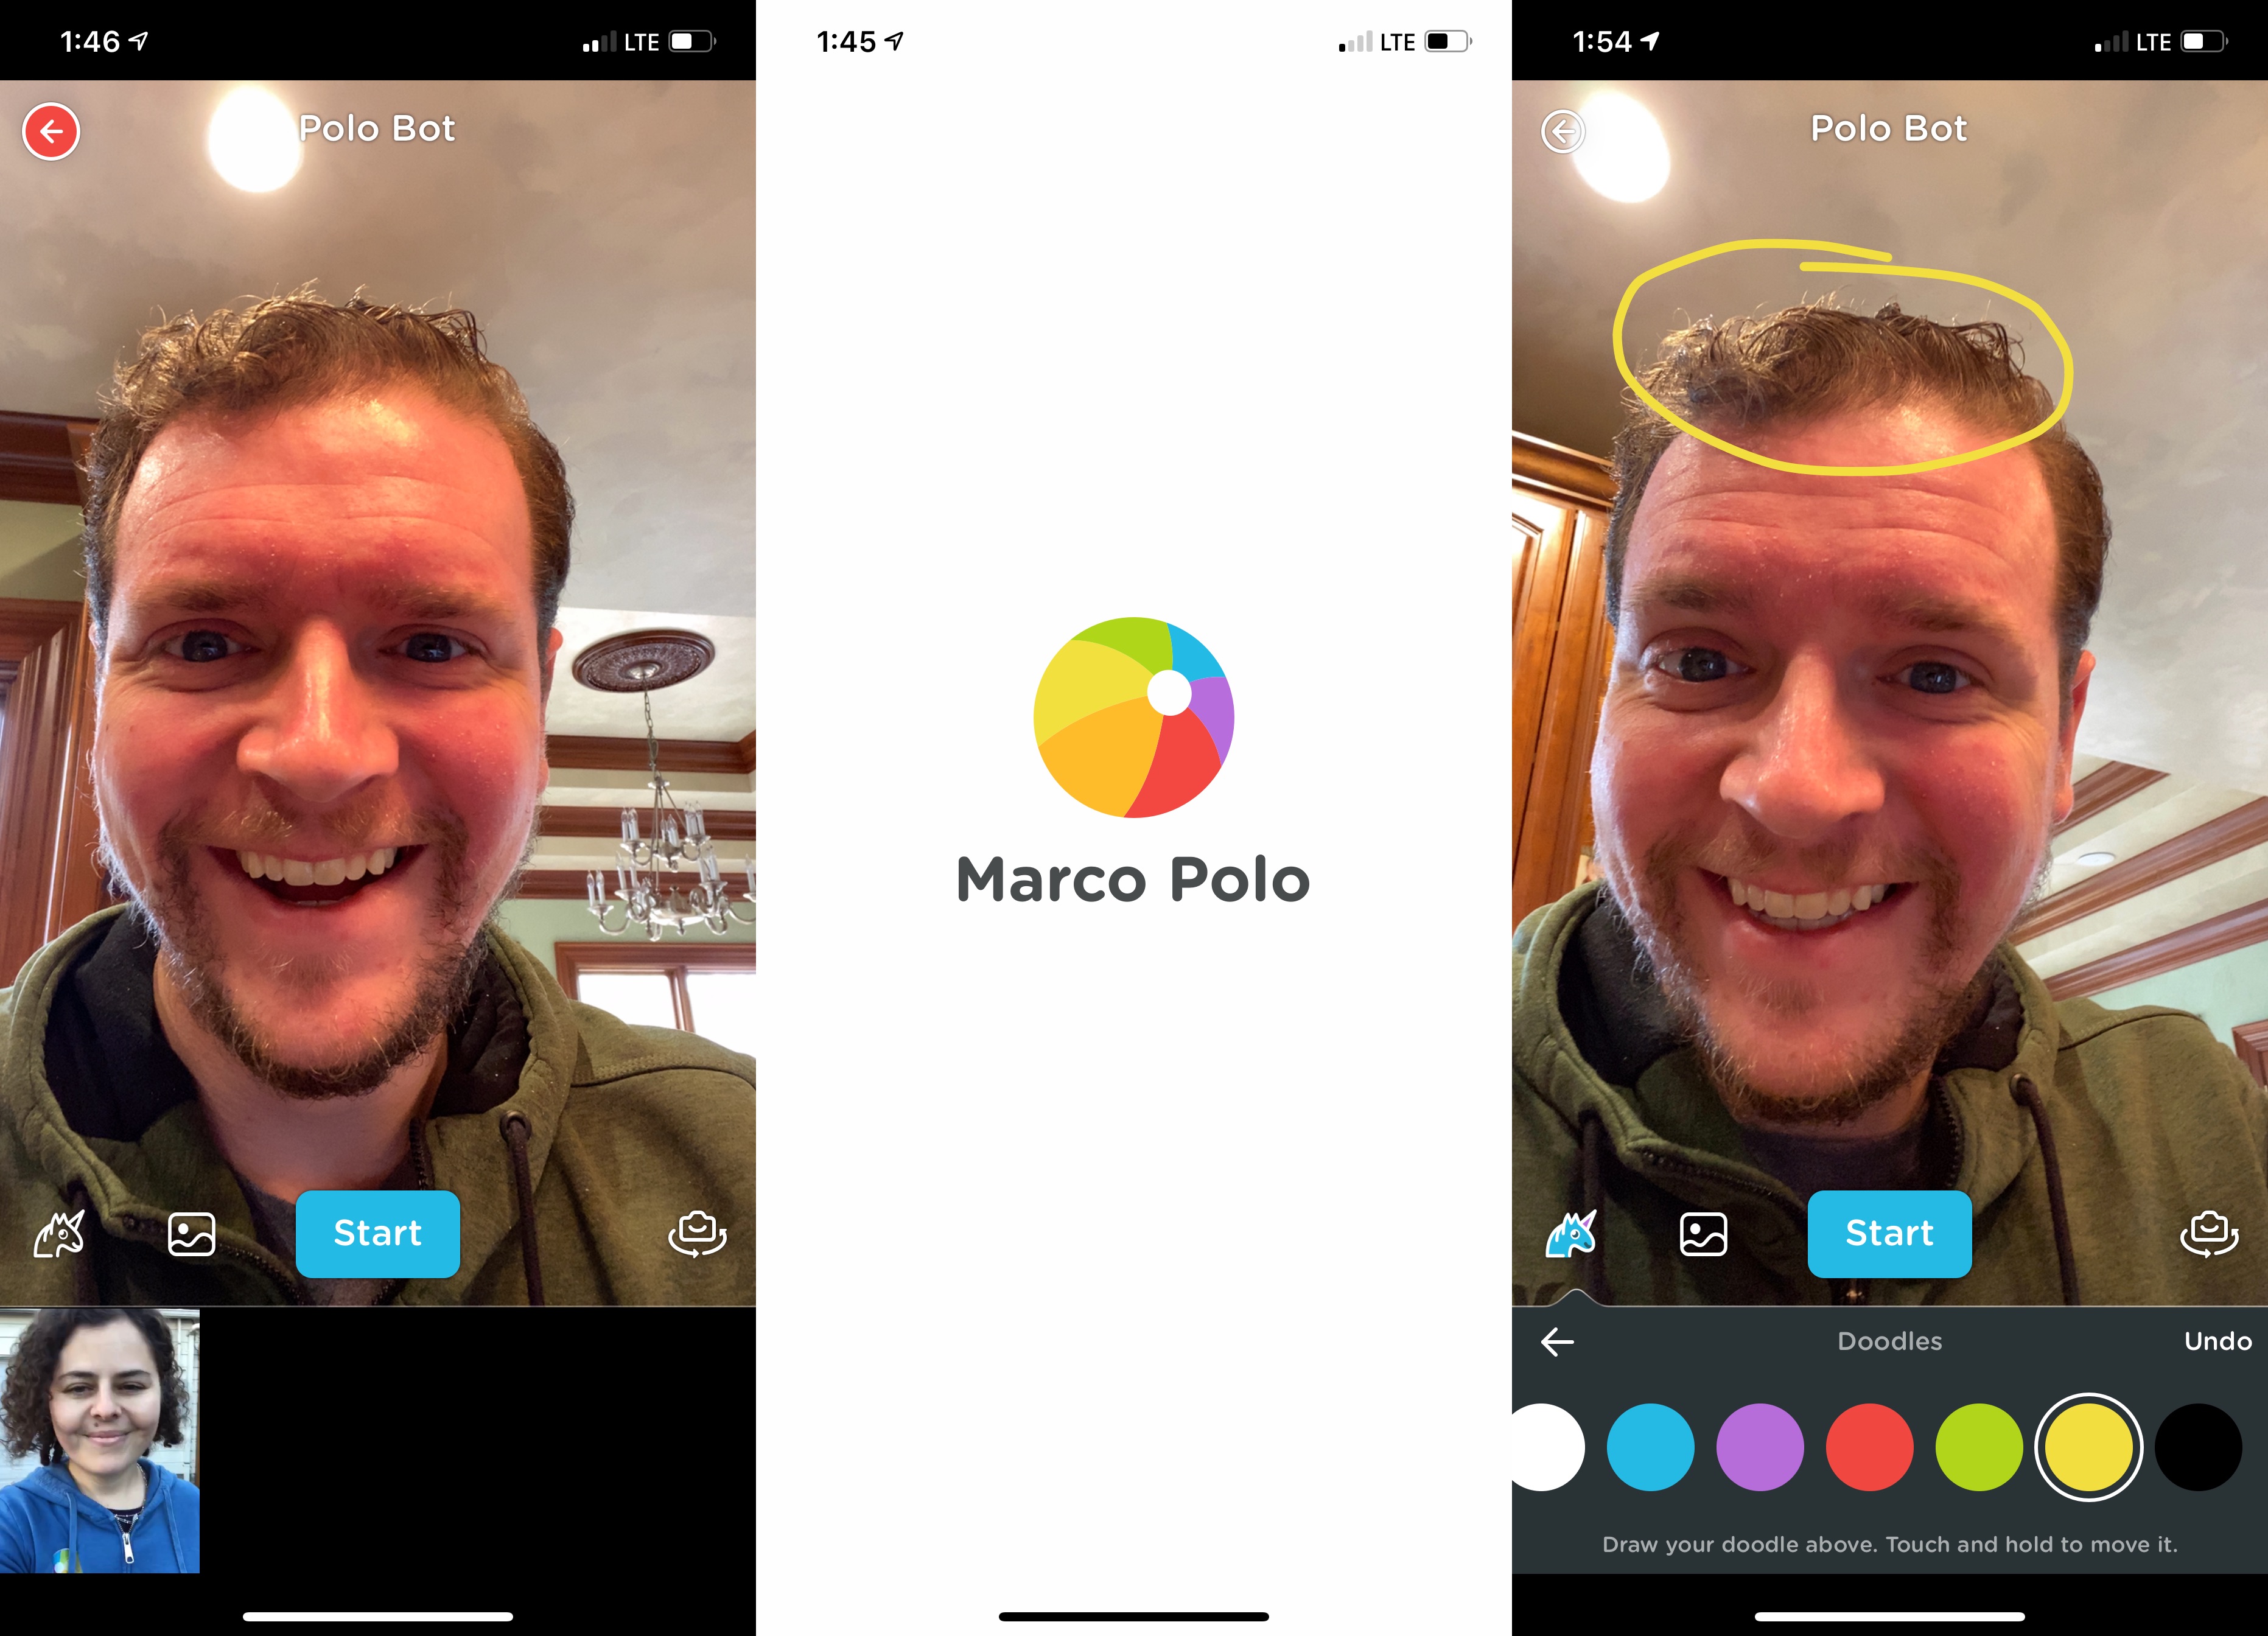 Haat eindpunt zonnebloem Marco Polo App: 5 Things You Need to Know